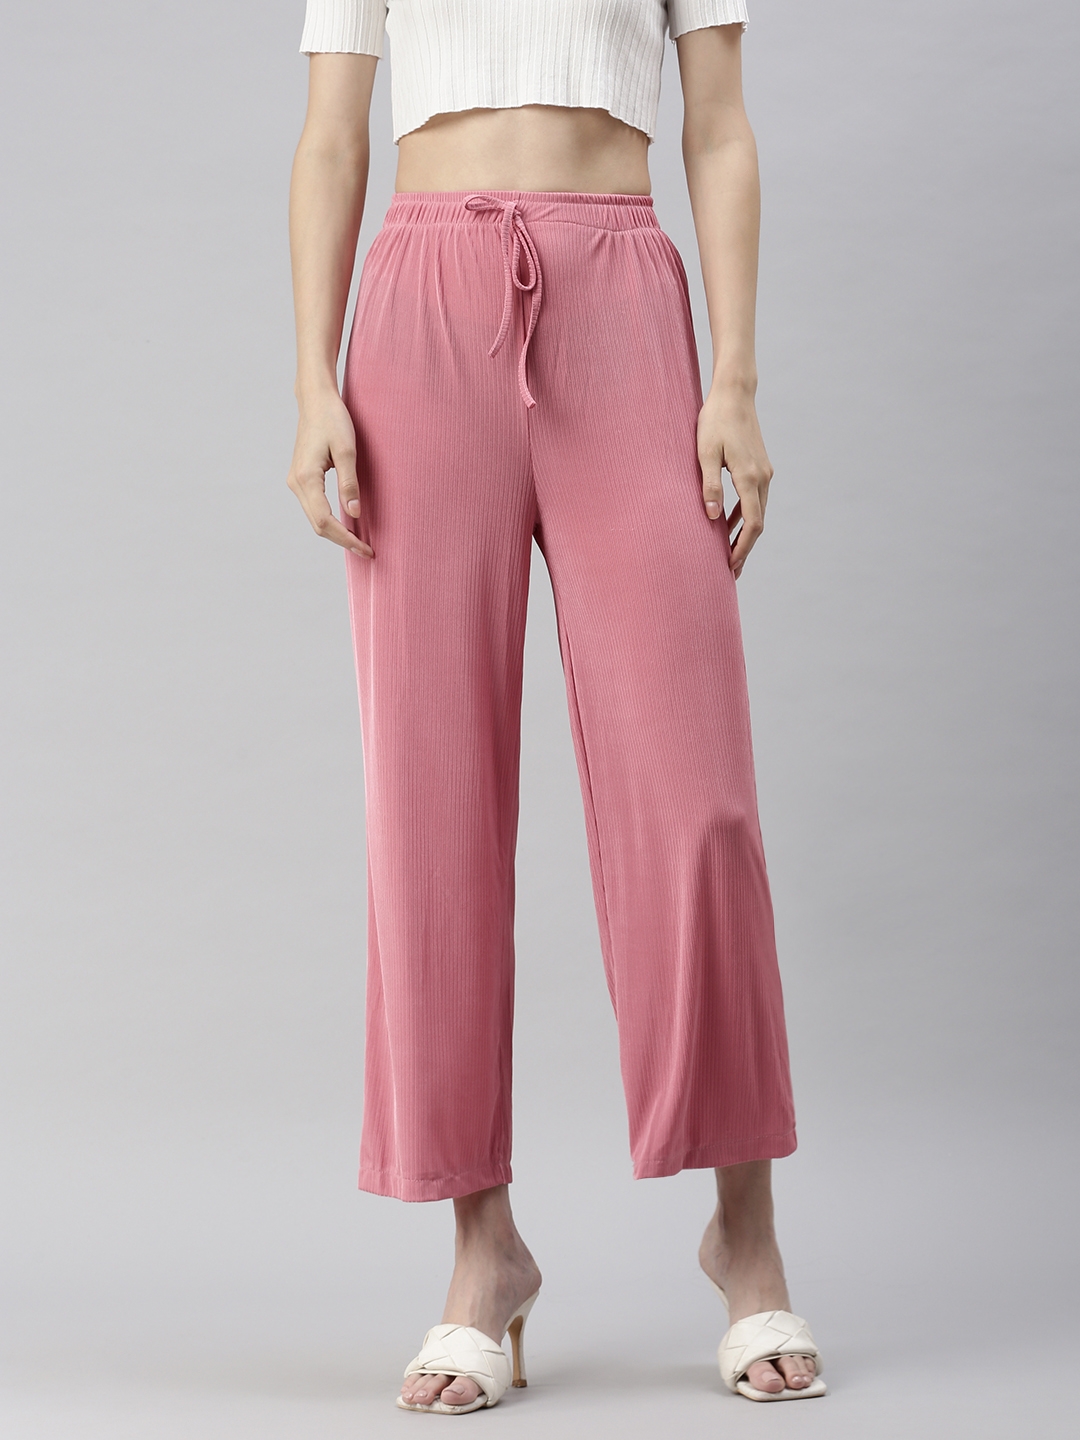 SHOWOFF Women's Solid High-Rise Pink Track Pants